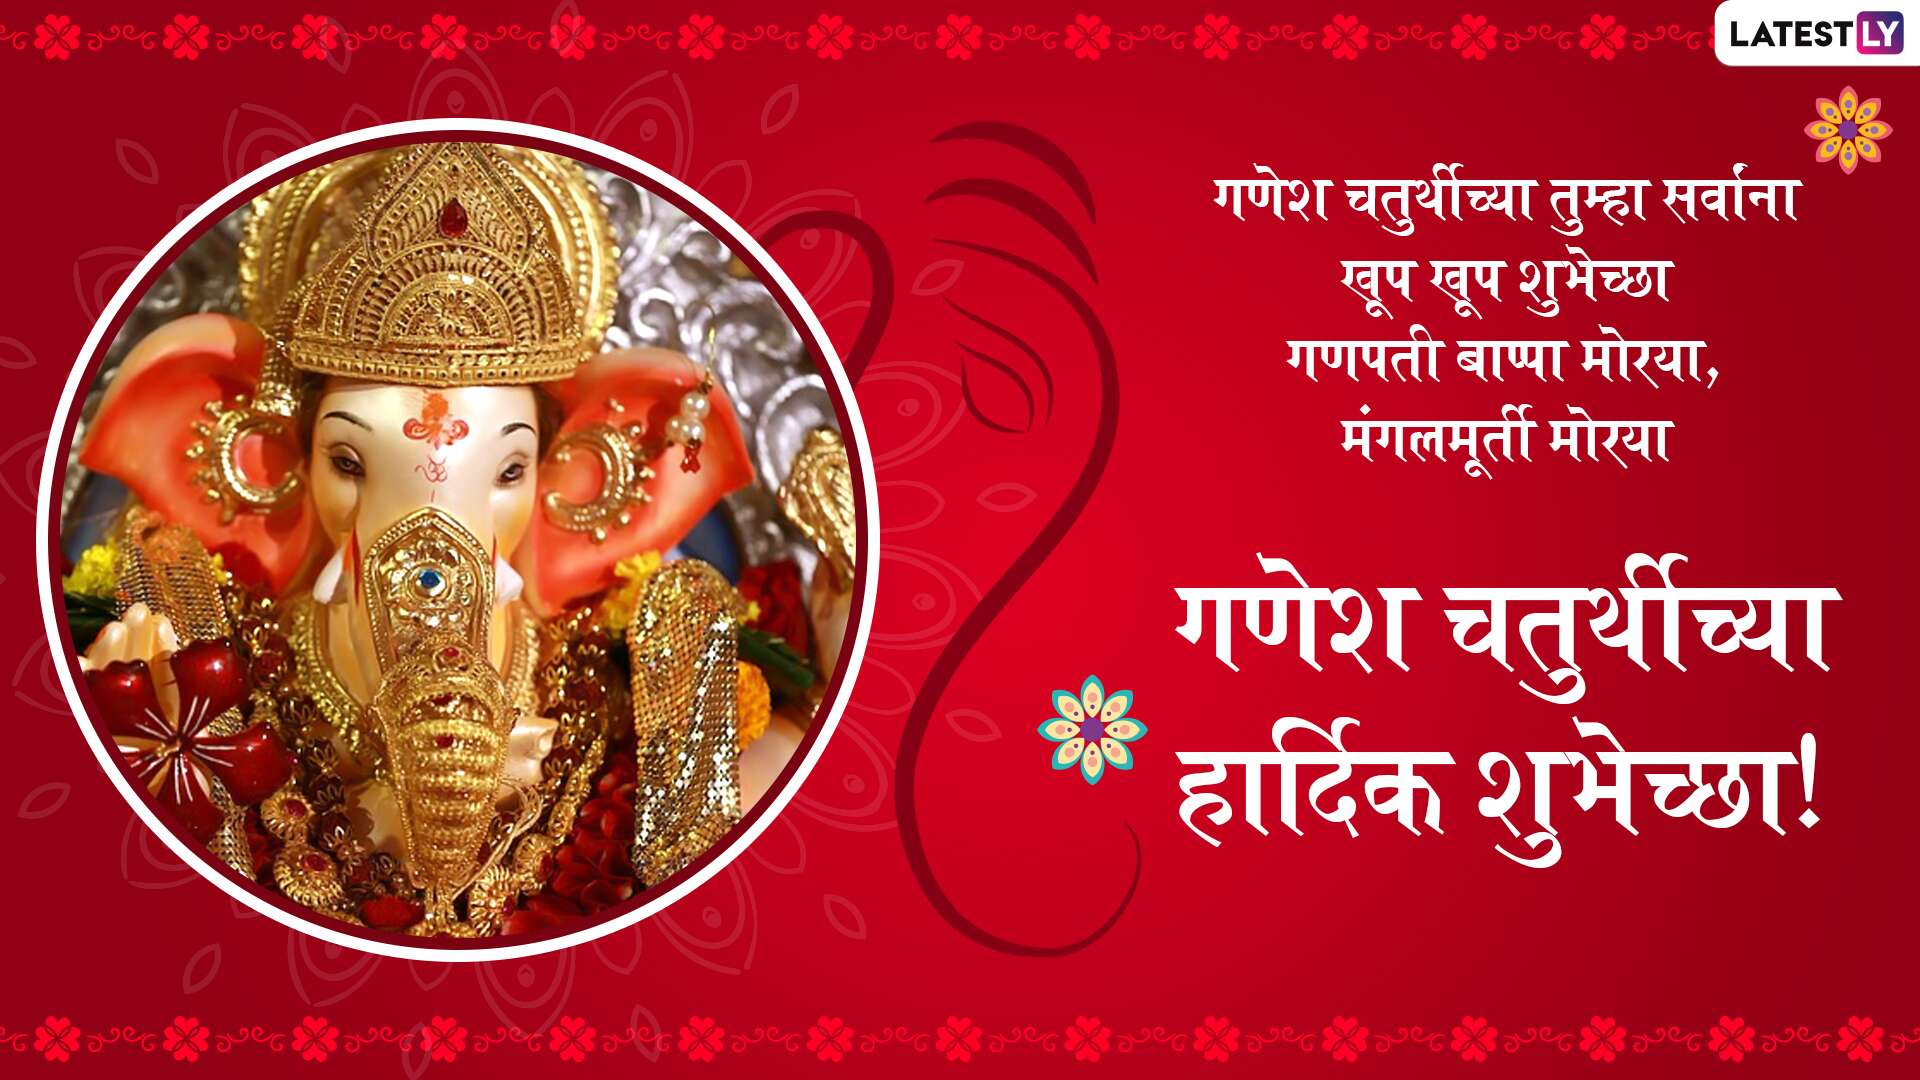 Ganesh Chaturthi 2022 Greetings in Marathi: Ganpati Bappa Morya Status,  Images, HD Wallpapers, Messages, SMS, Quotes and Wishes To Share During  Ganeshotsav | 🙏🏻 LatestLY